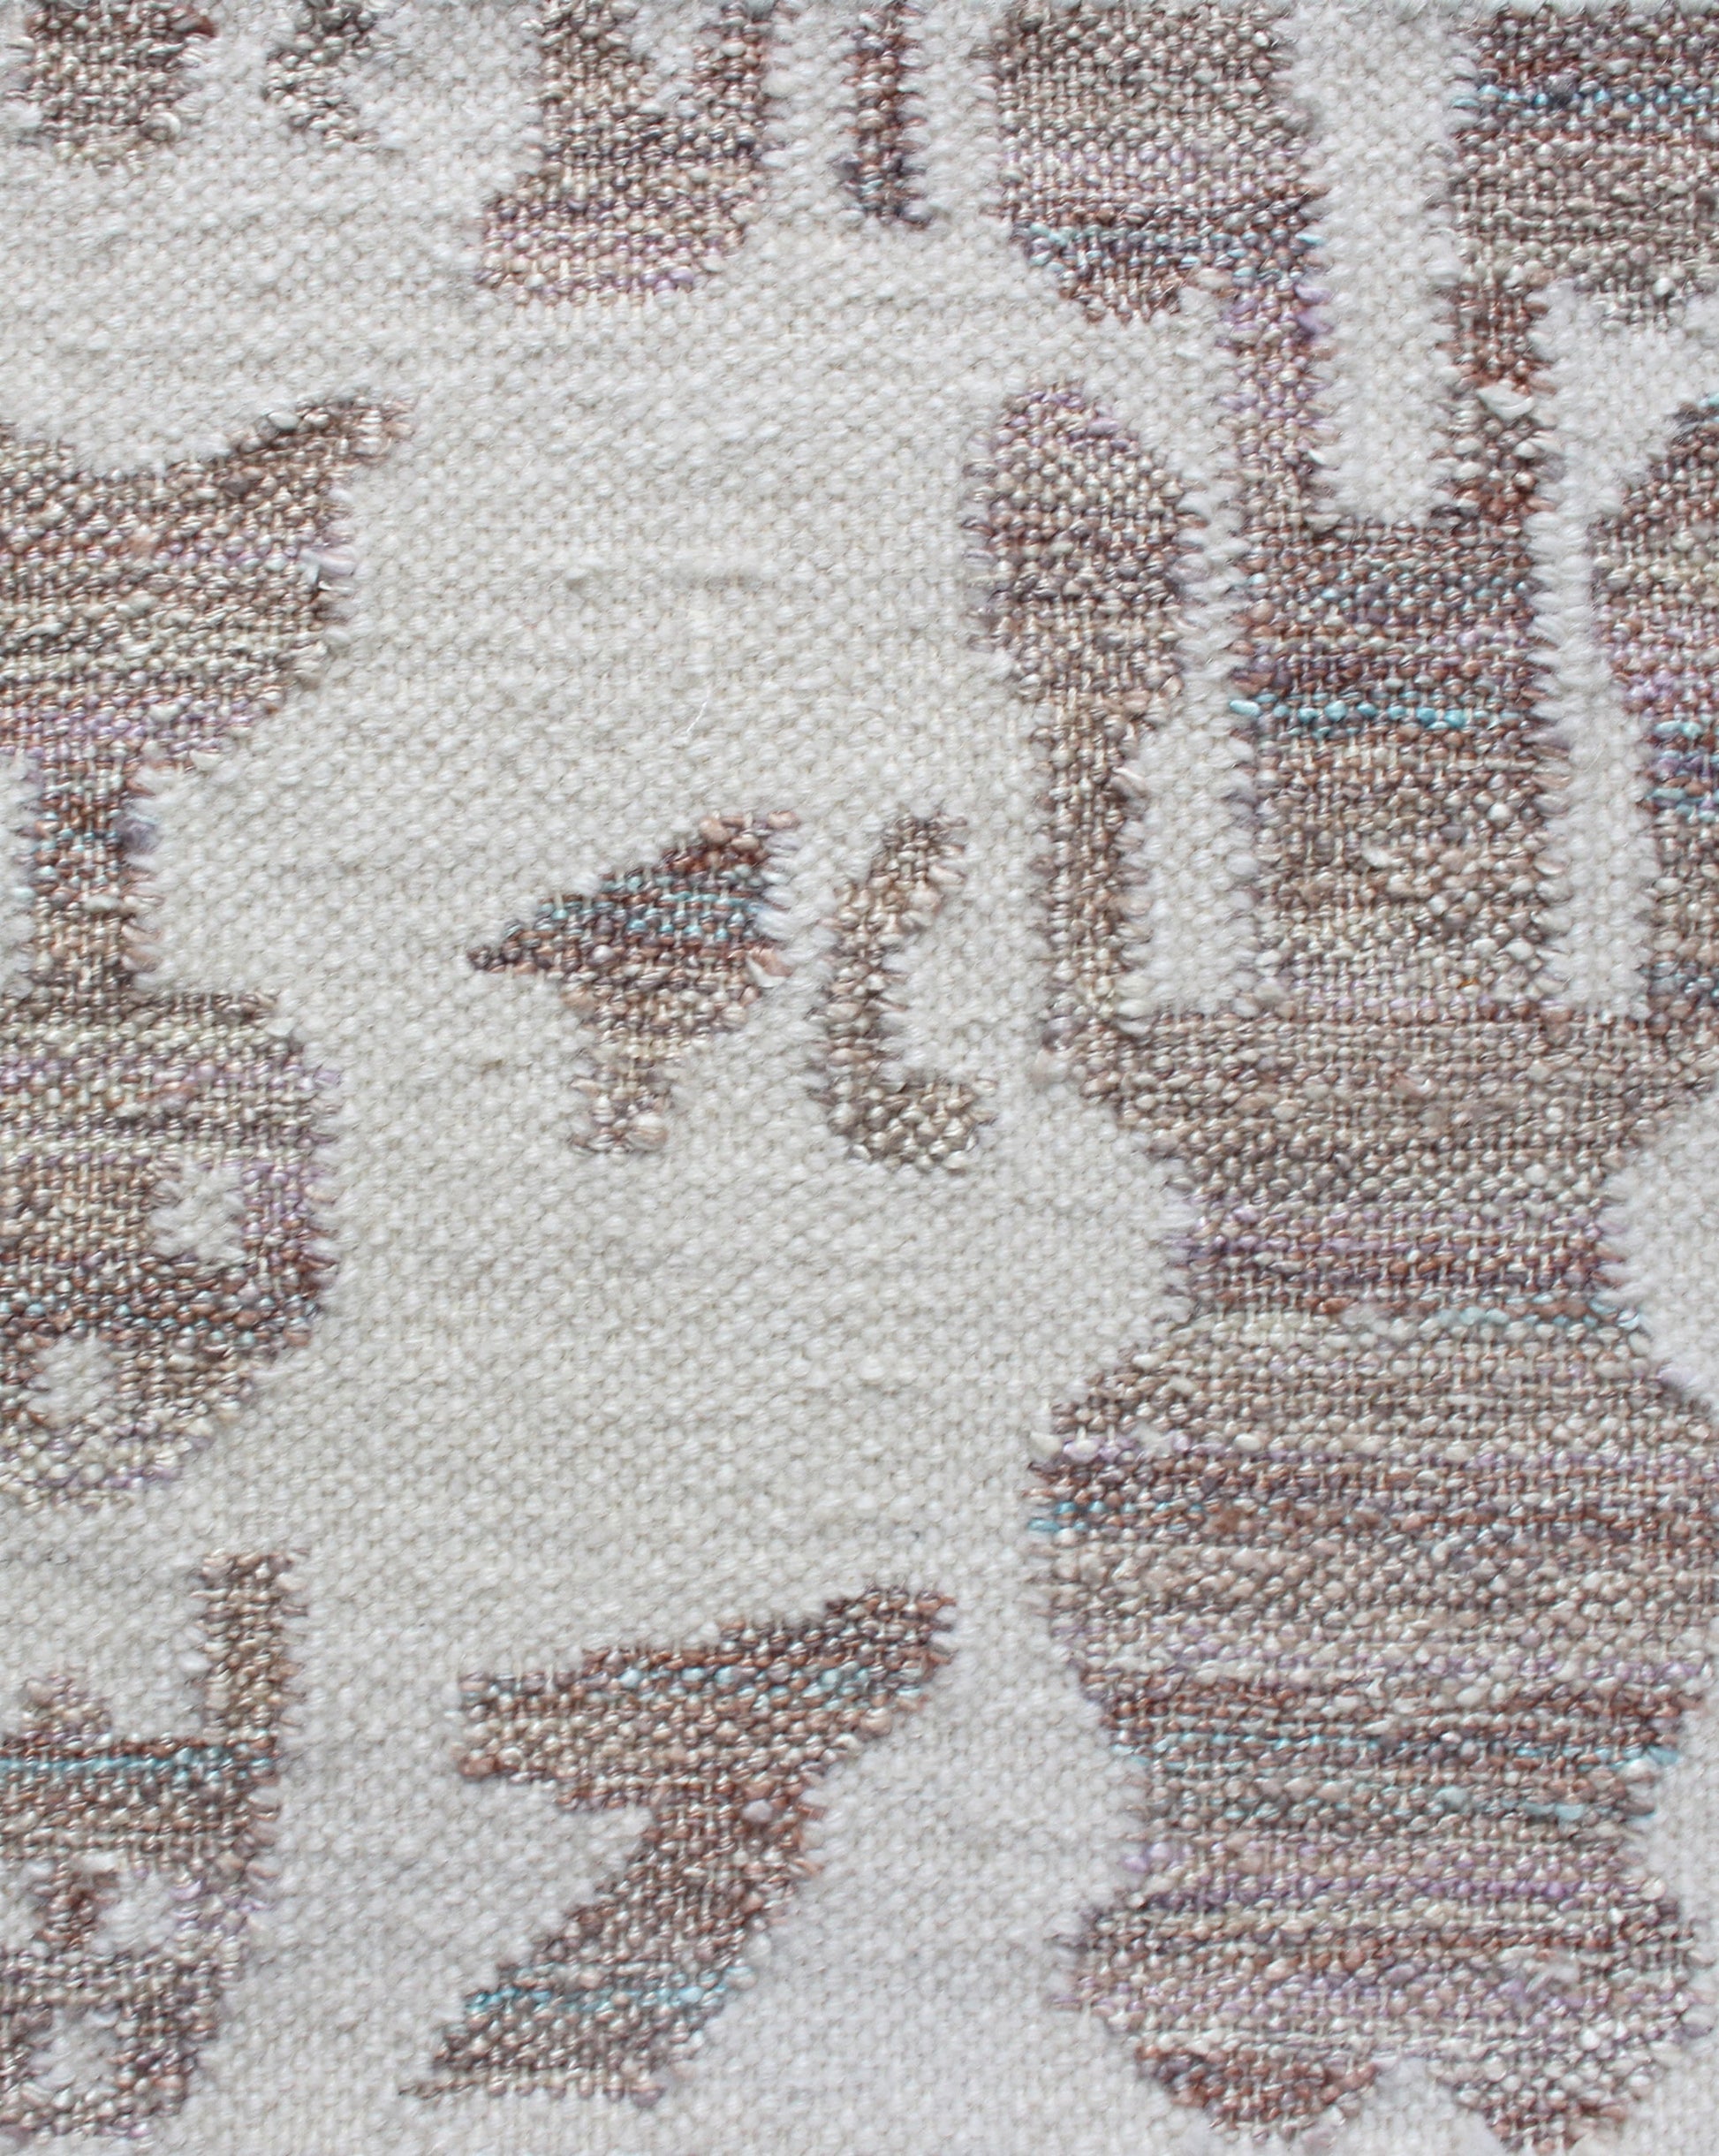 A close up of a Biami Flatweave Rug Hide with a bird on it